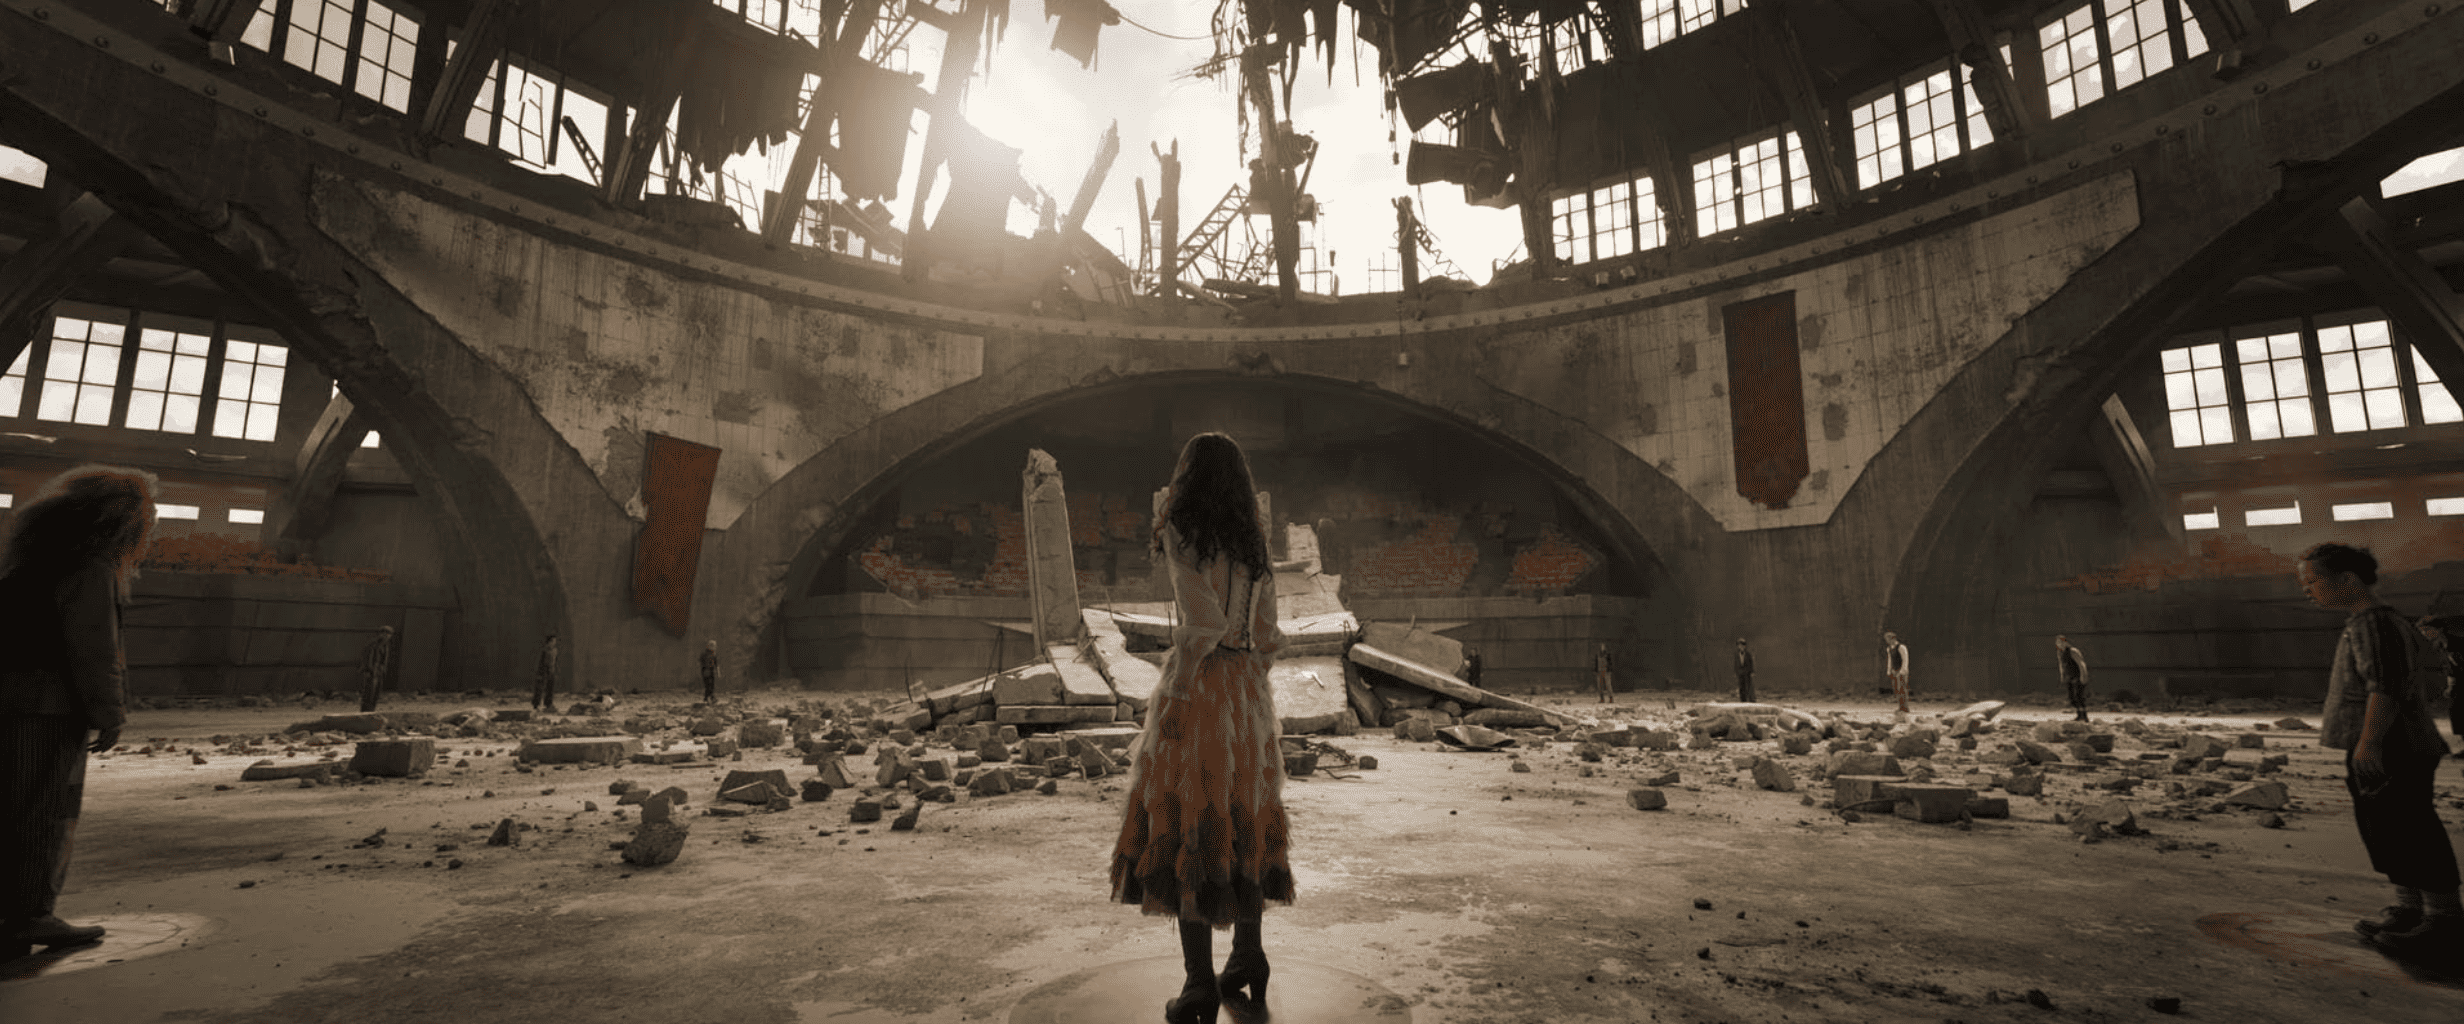 A girl stands in a blown-apart arena in this image from Lionsgate Films.